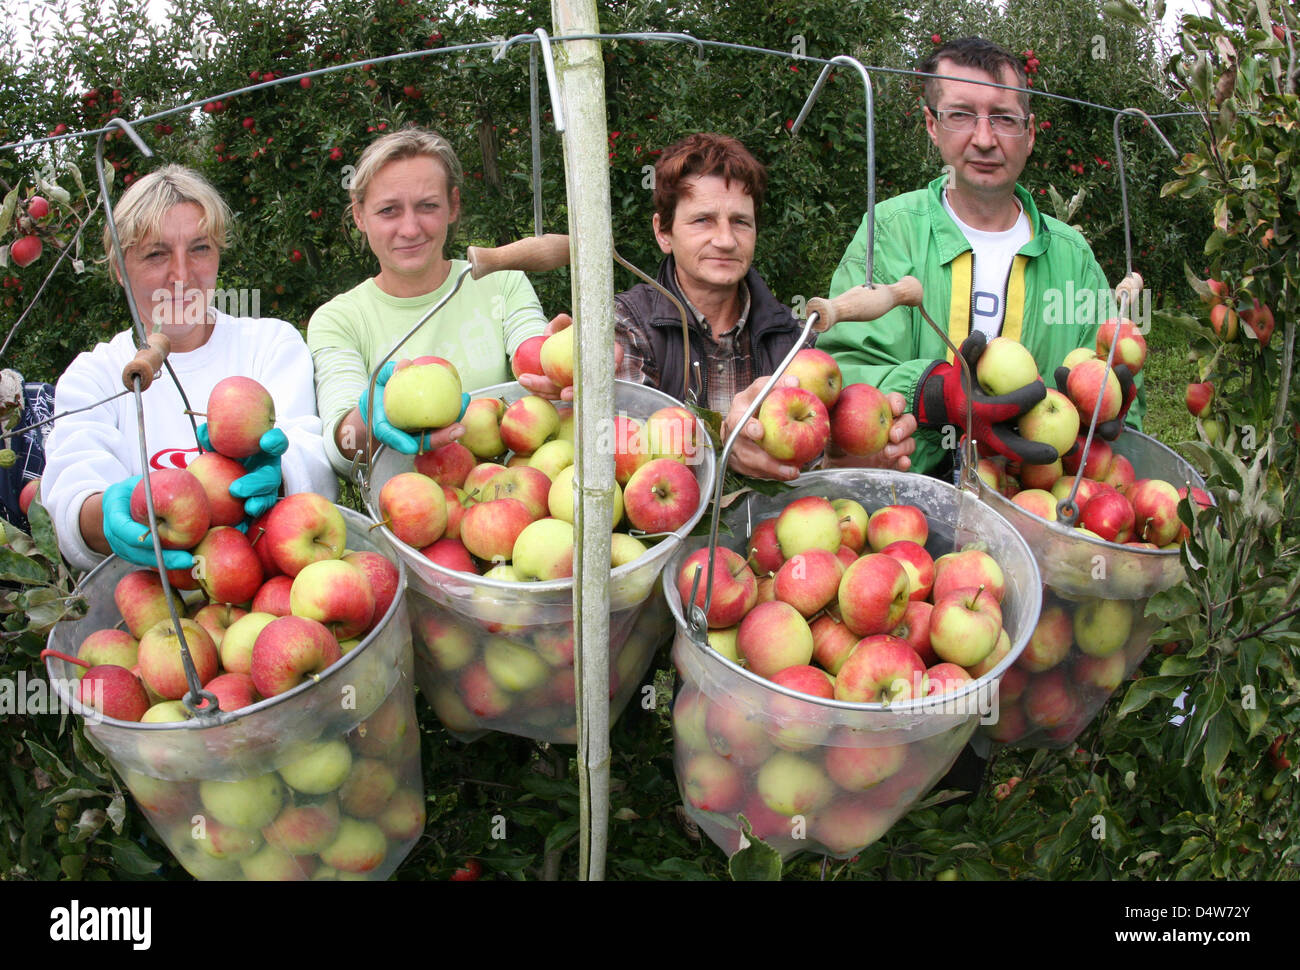 Polish harvest workers of the fruit manor Kleinert present their harvest bags filled with Elstar-apples in Marquardt near Potsdam, Germany, 15 September 2010. This year, the lowest apple harvest outcome since 1992 is expected. With a cultivation area of 106 hectare in Marquardt, of which 42 hectare are used for apples, losses of 30 to 60 per cent are expected this year. Photo: Nest Stock Photo